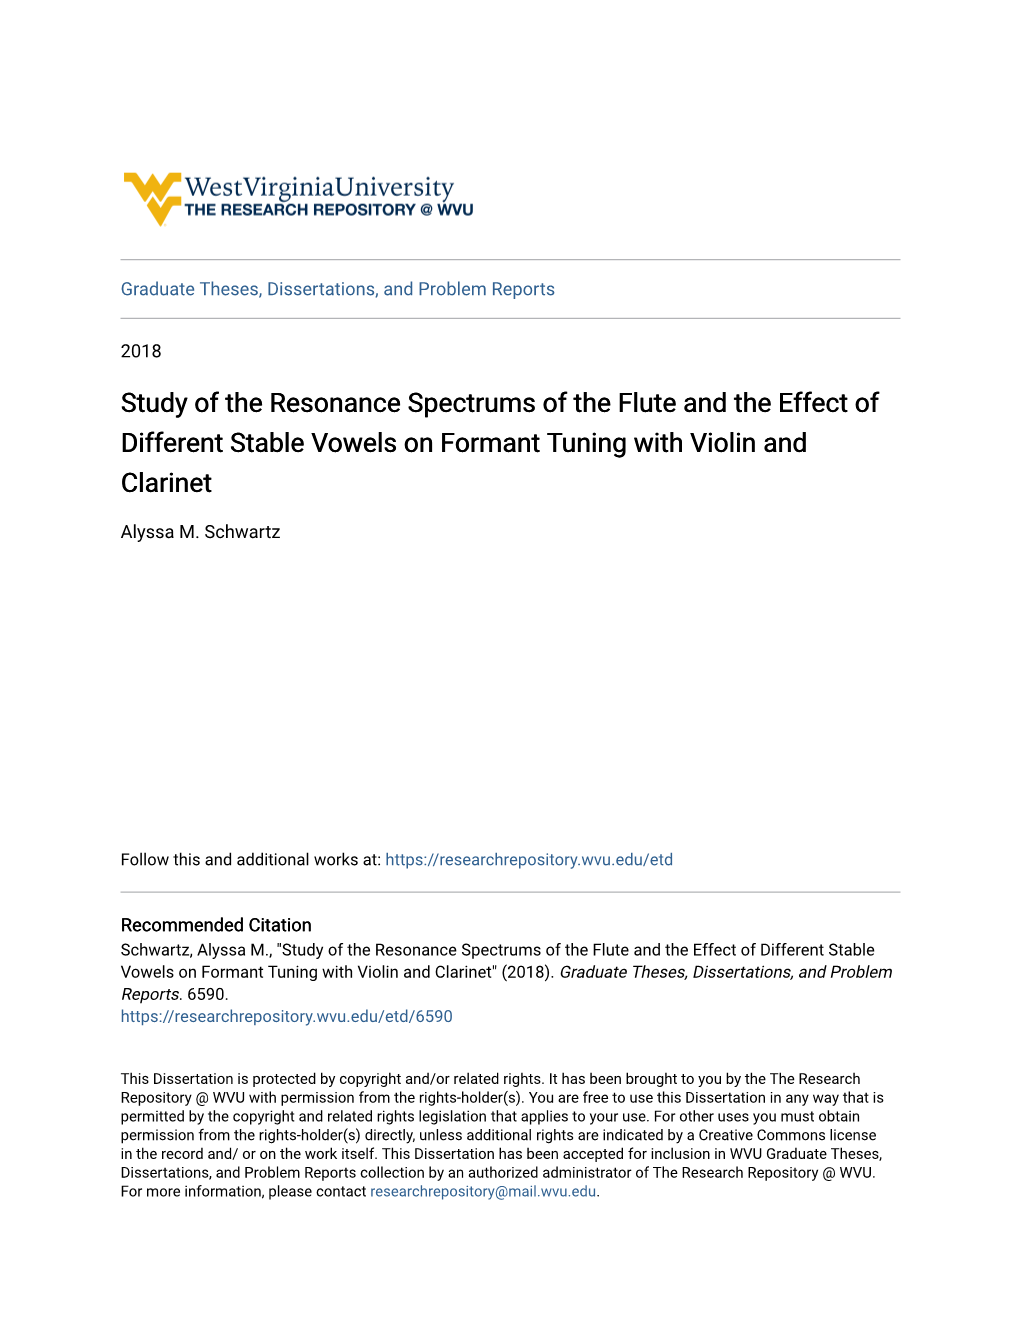 Study of the Resonance Spectrums of the Flute and the Effect of Different Stable Vowels on Formant Tuning with Violin and Clarinet